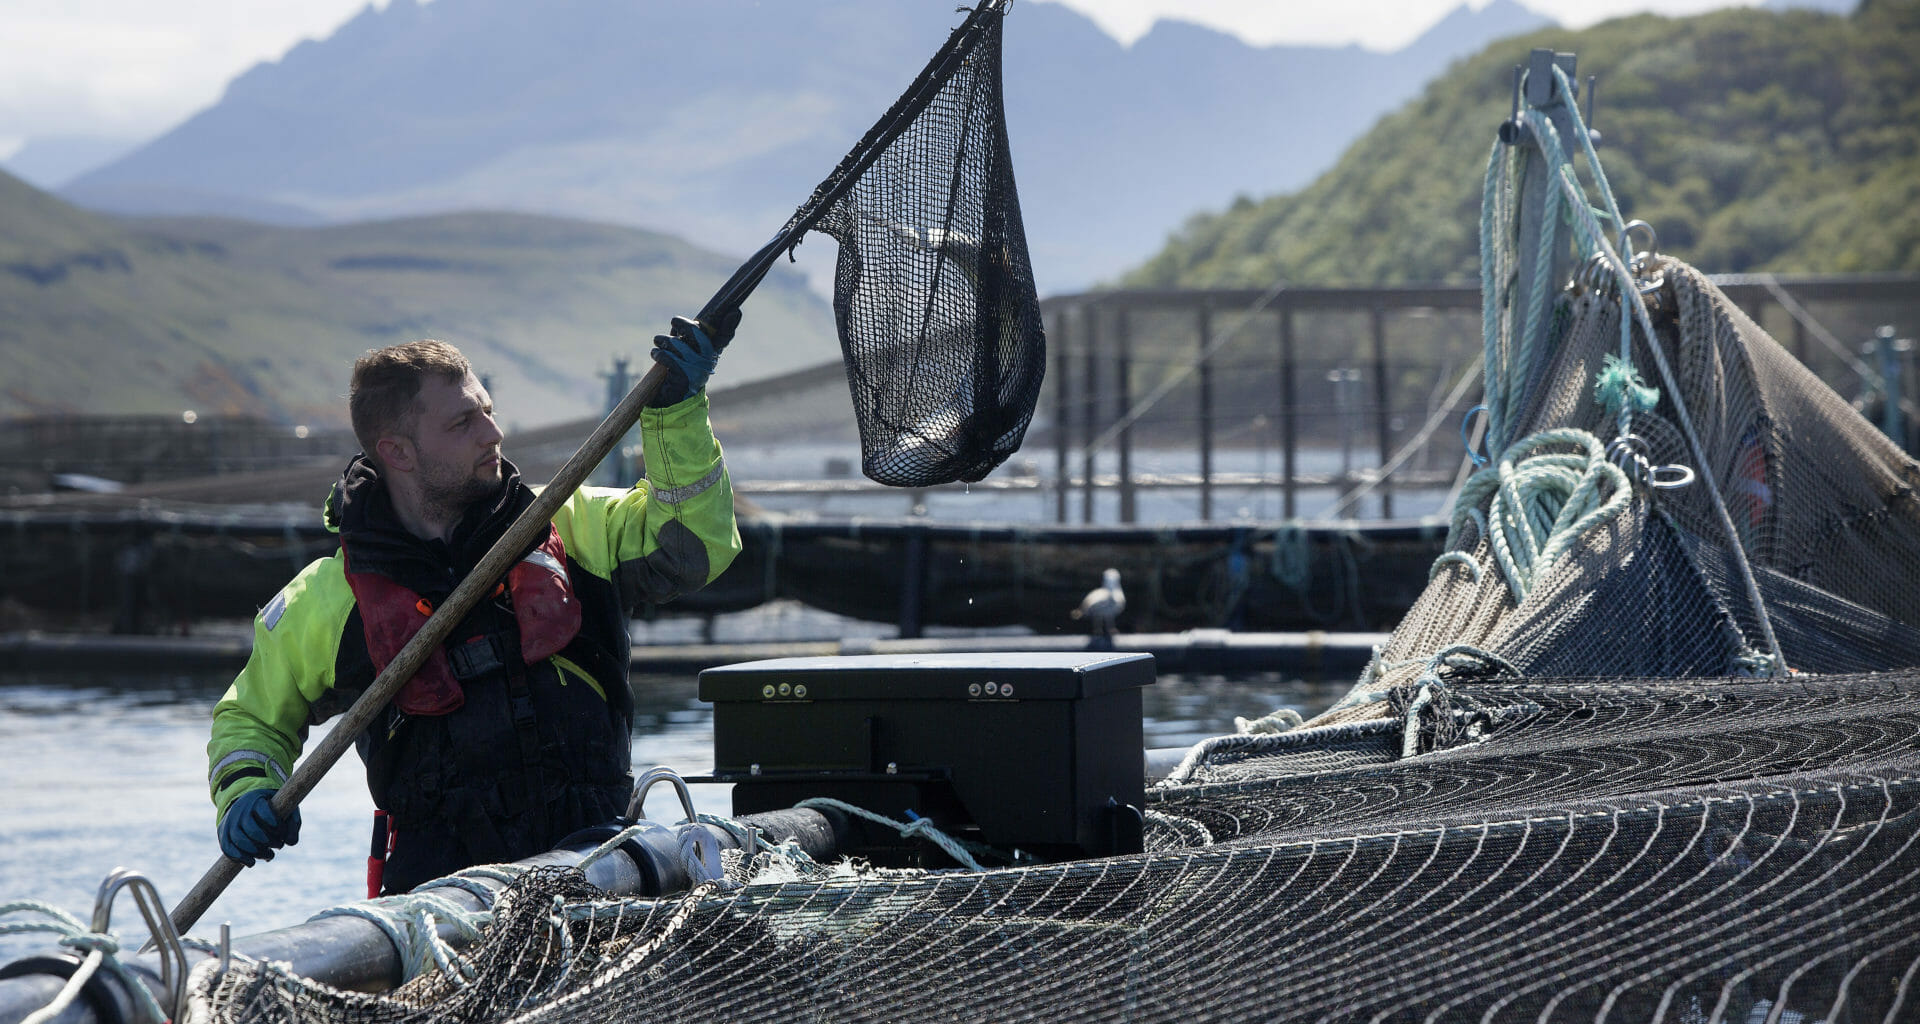 Troubled waters: communities at odds on fish farming 3